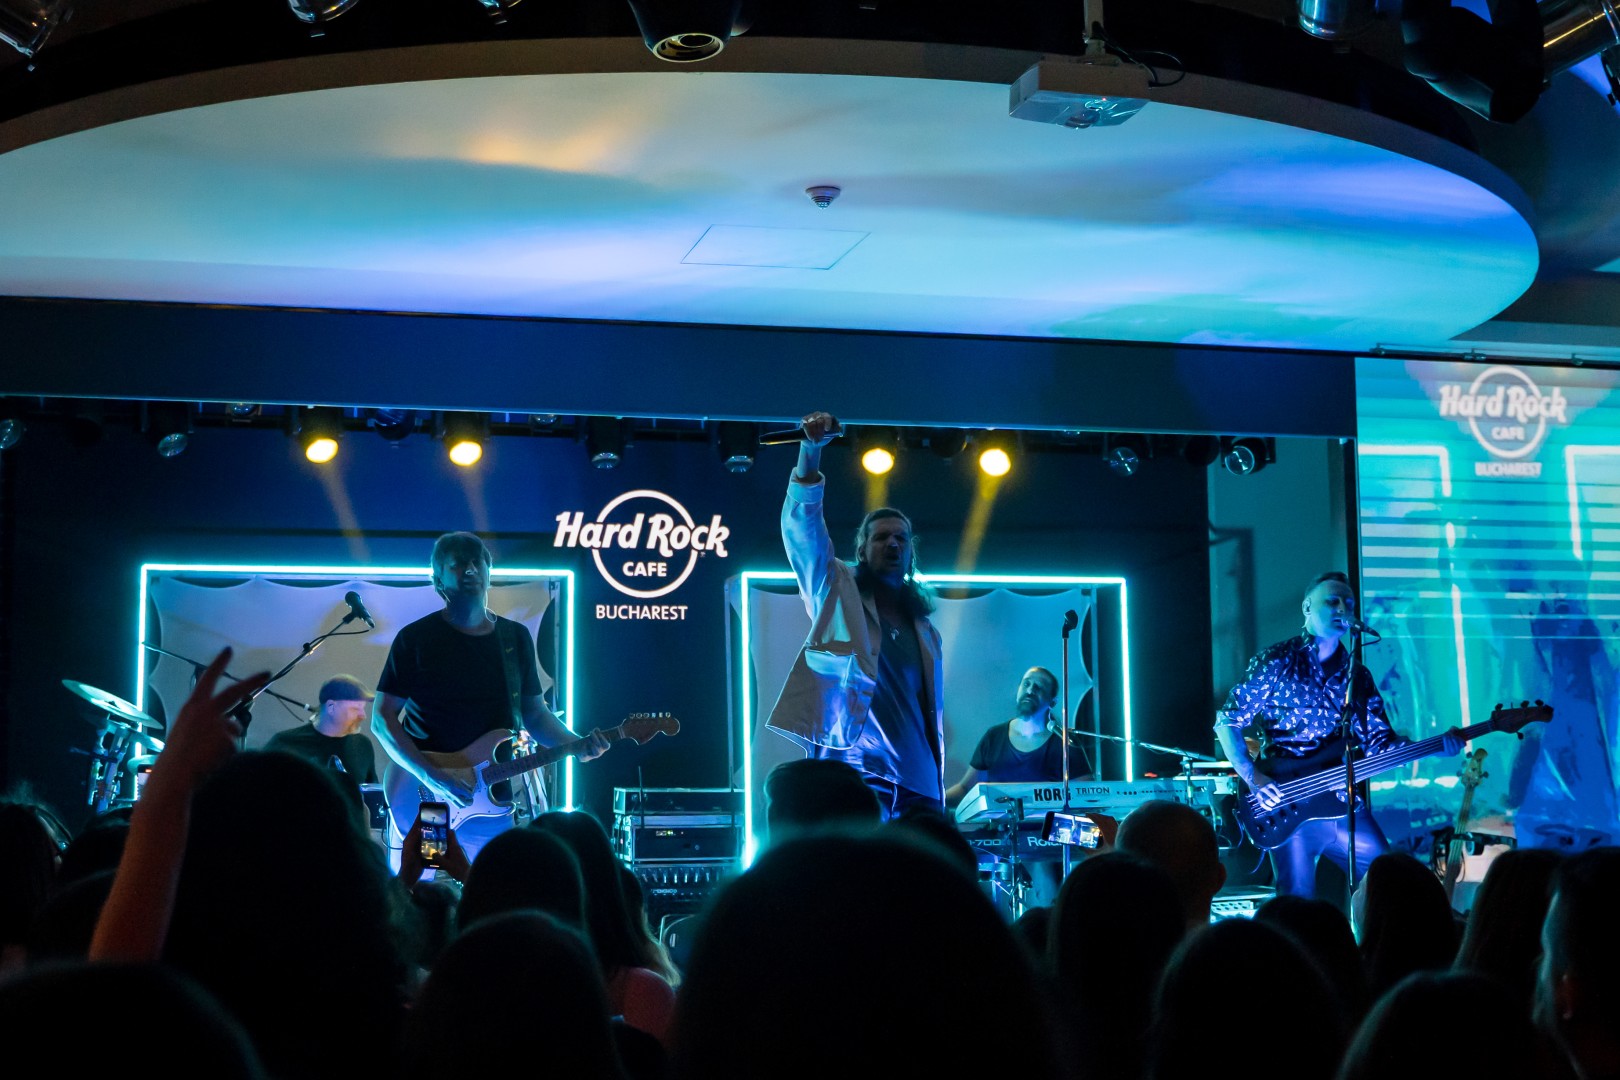 Vama at Hard Rock Cafe in Bucharest on January 12, 2023 (f2e2a15d6b)